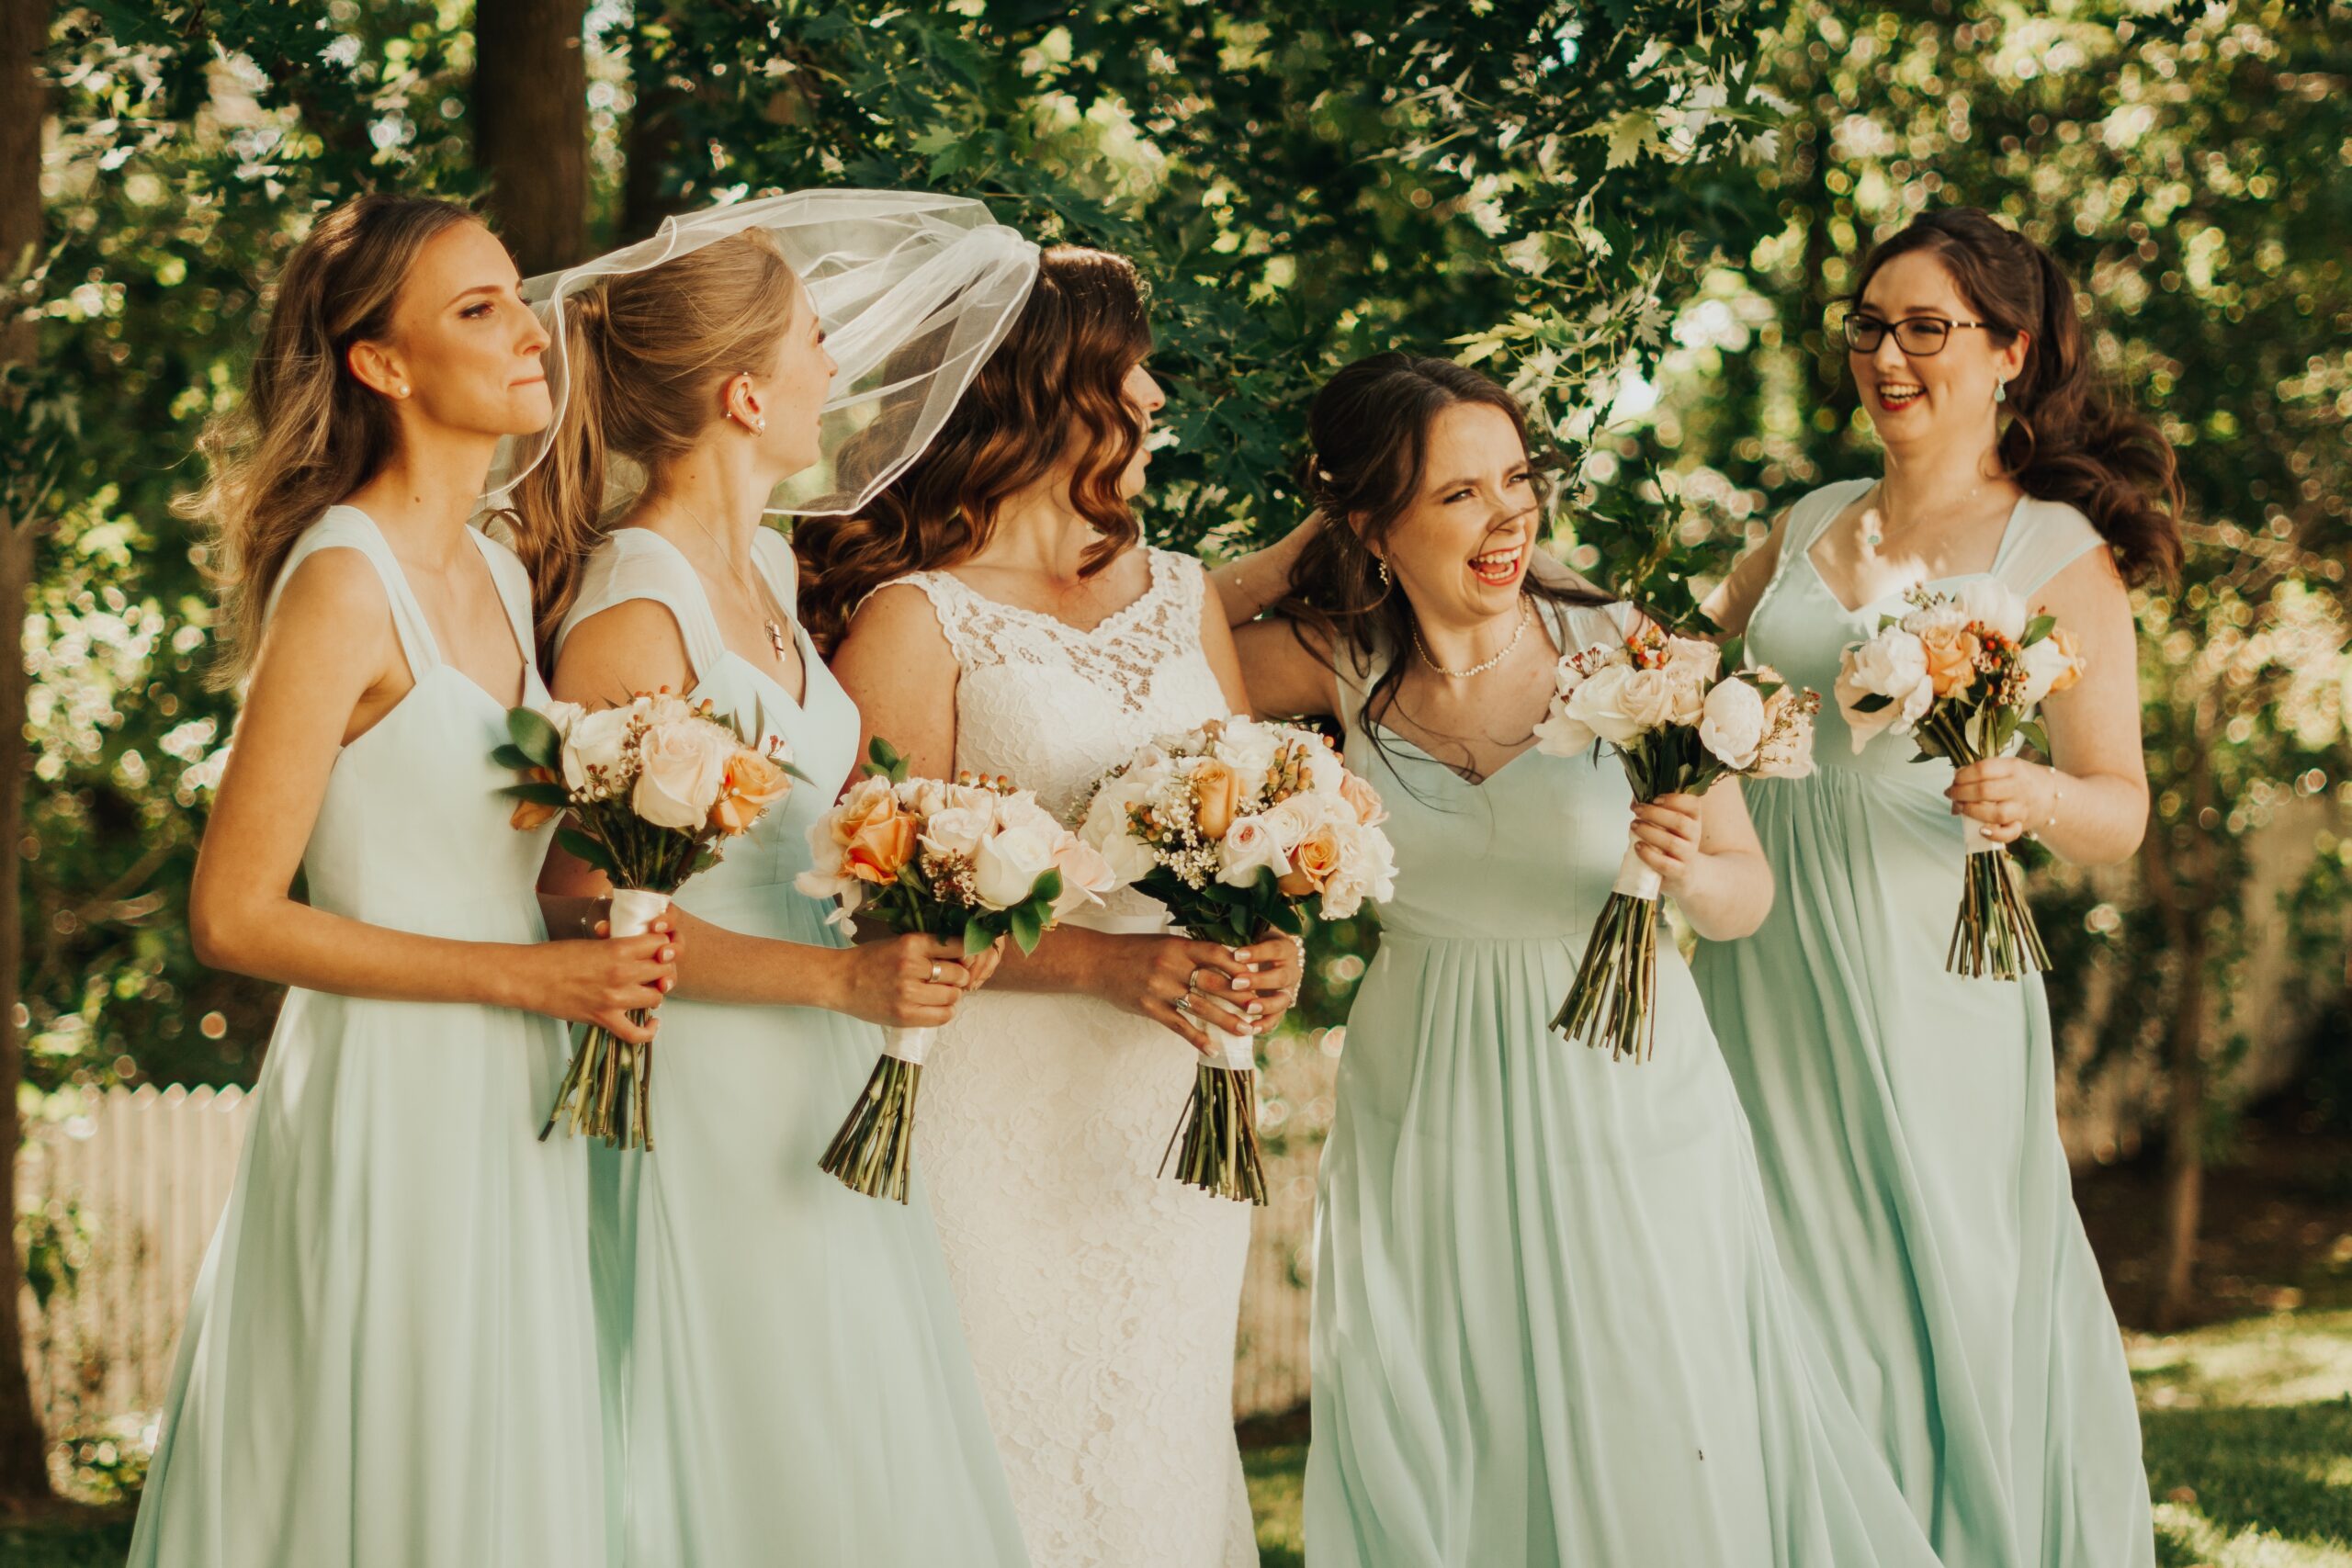 Bridesmaid Dress Colors You Can’t Go Wrong